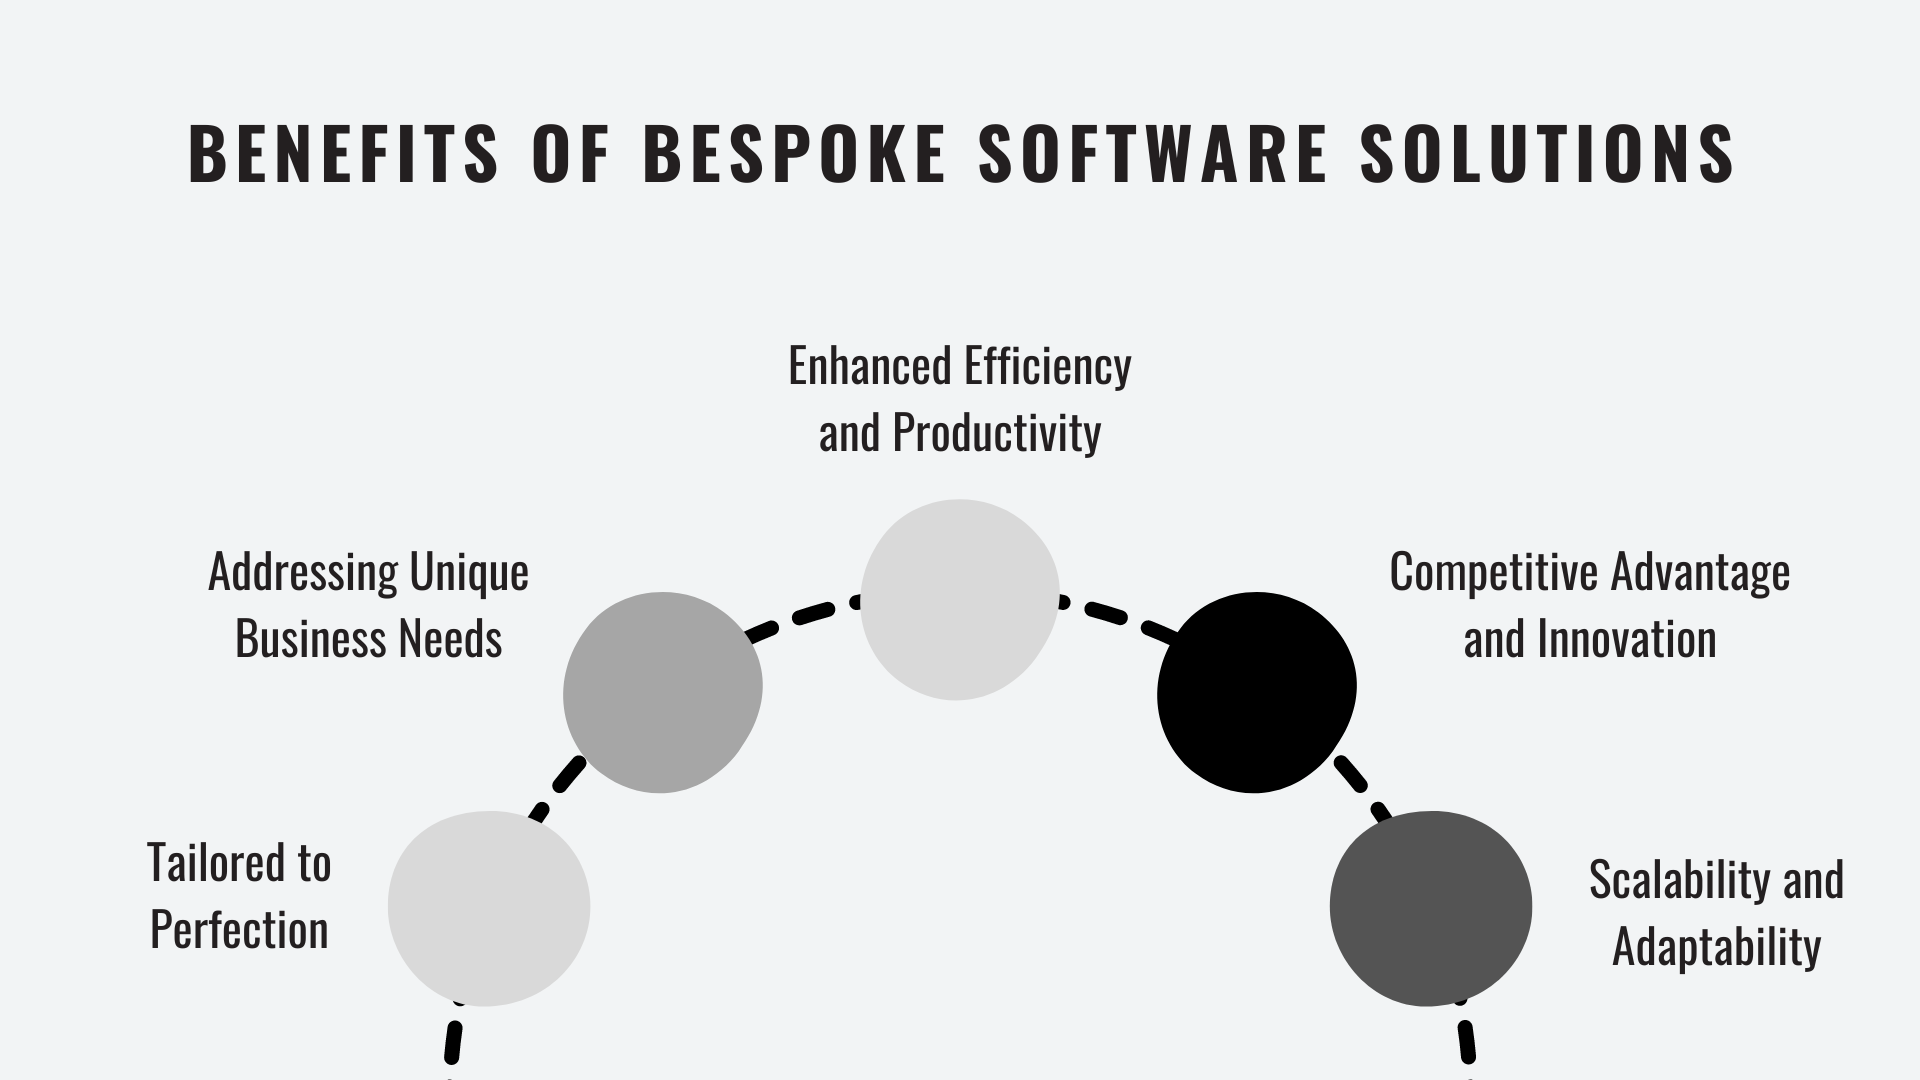 The Power of Bespoke Software Solutions